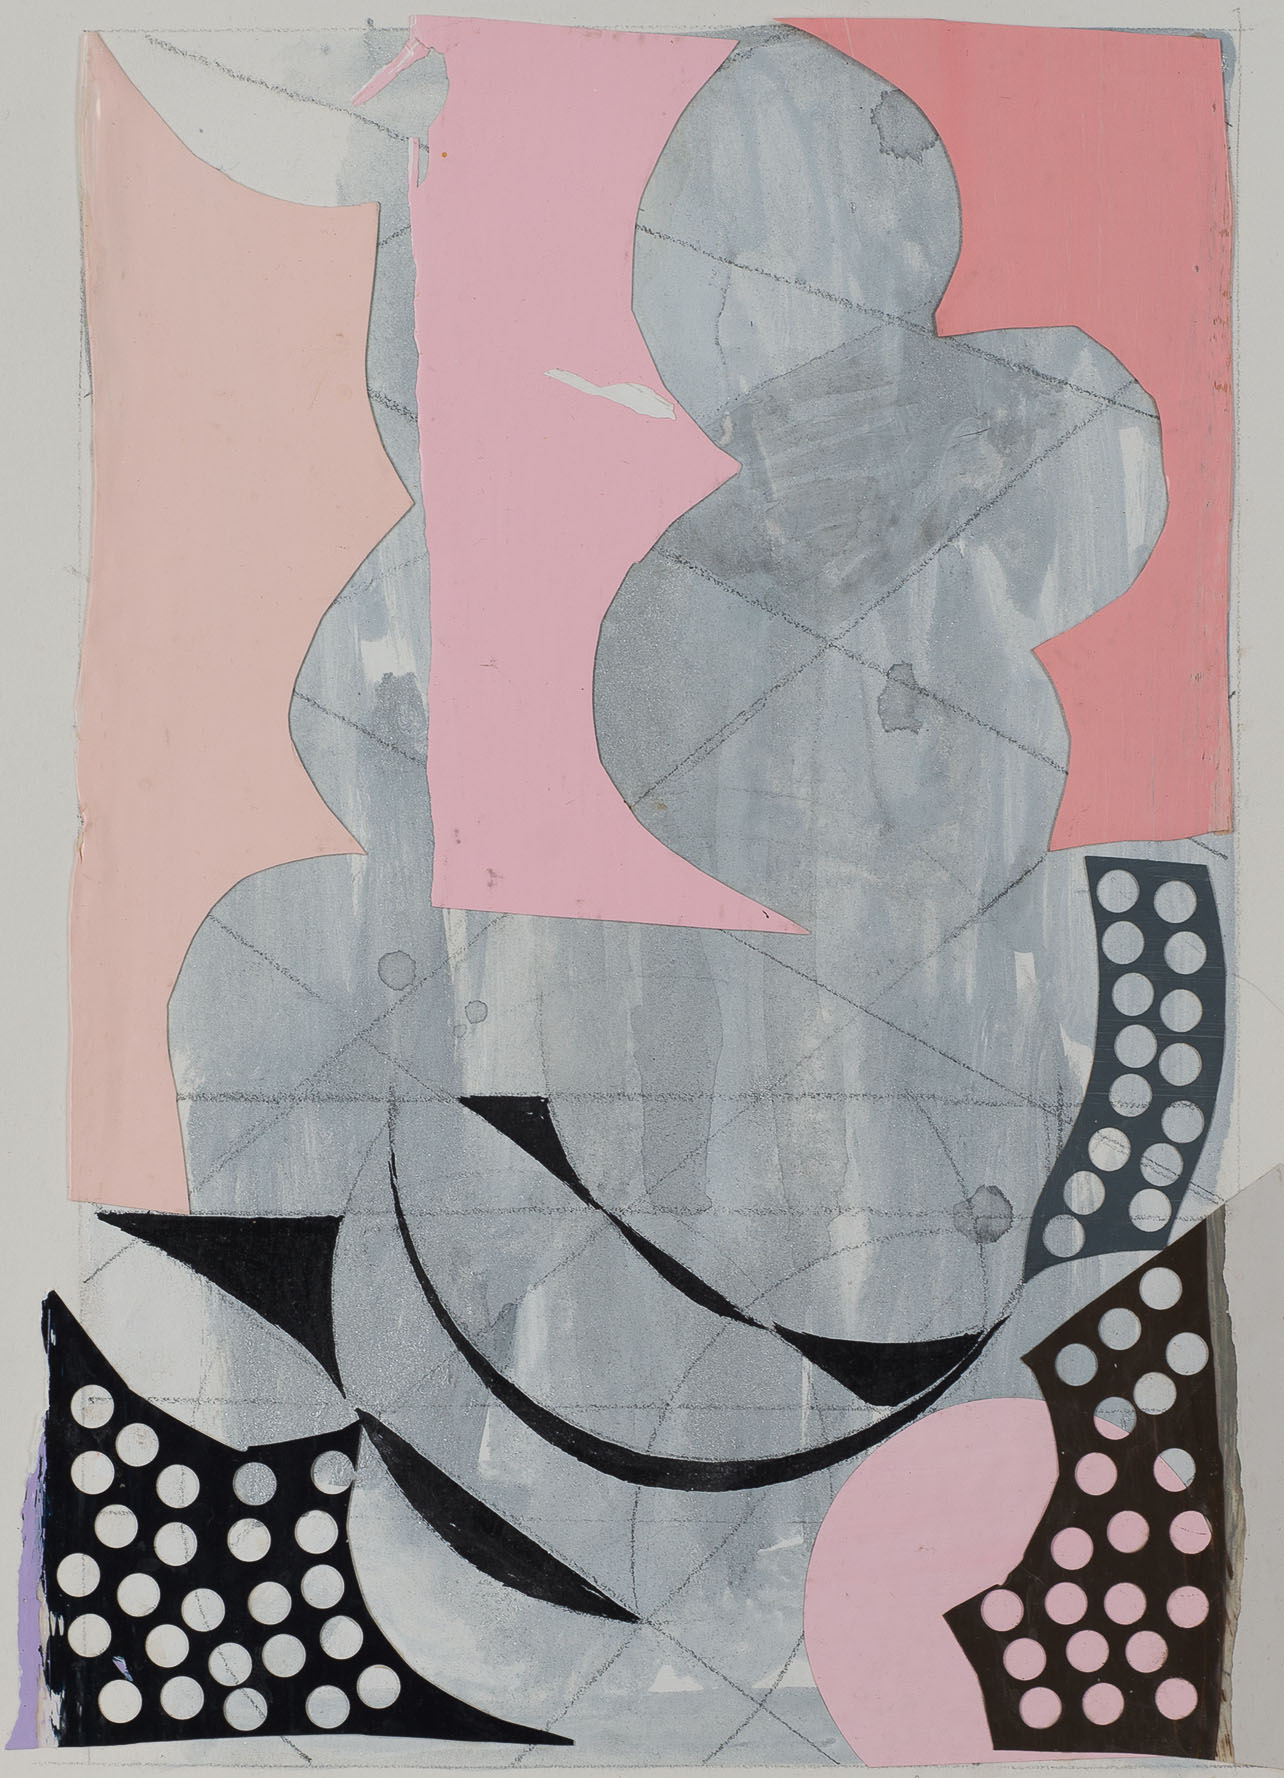  Peter Young,  #44 - 1989 , 1989, Acrylic and collage on paper, 15 x 11 1/2 inches (38.1 x 29.2 cm) 